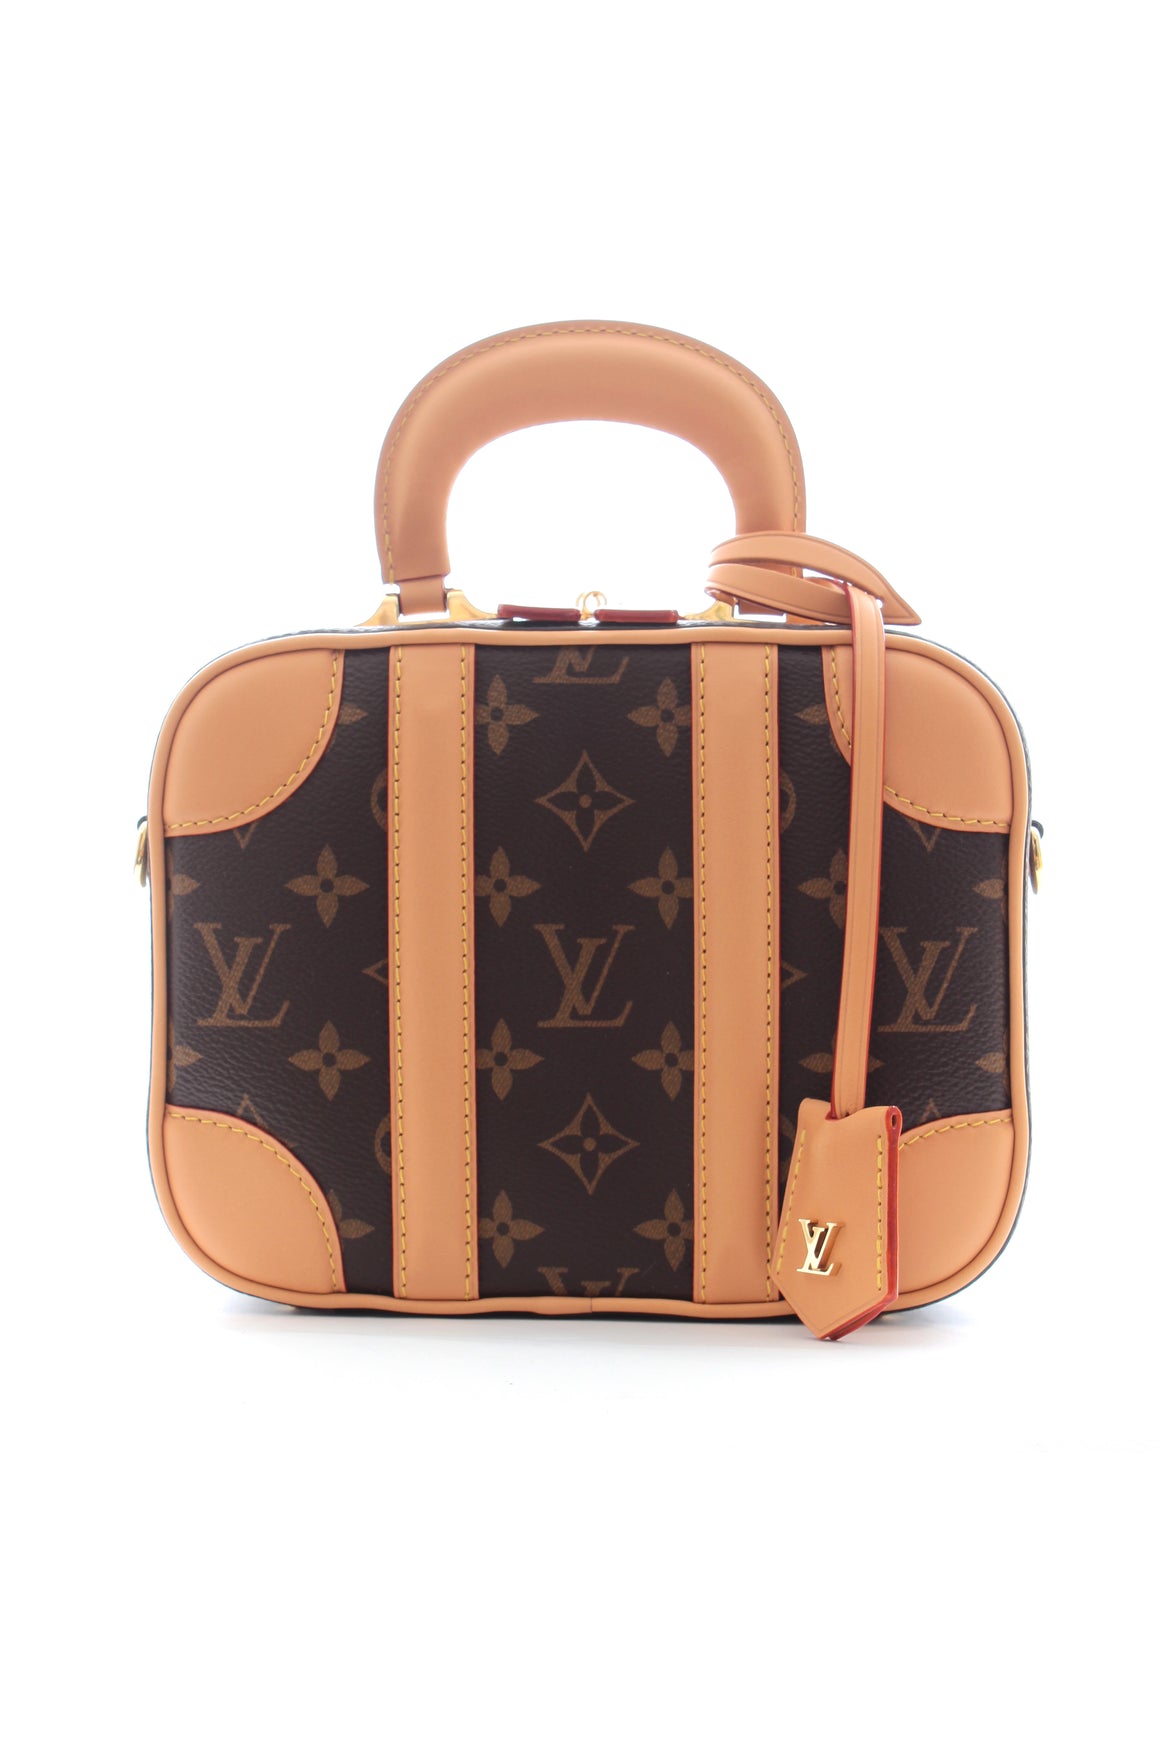 Louis Vuitton Valisette BB Monogram Canvas and Leather Bag - Fall-Winter 2019 Collection